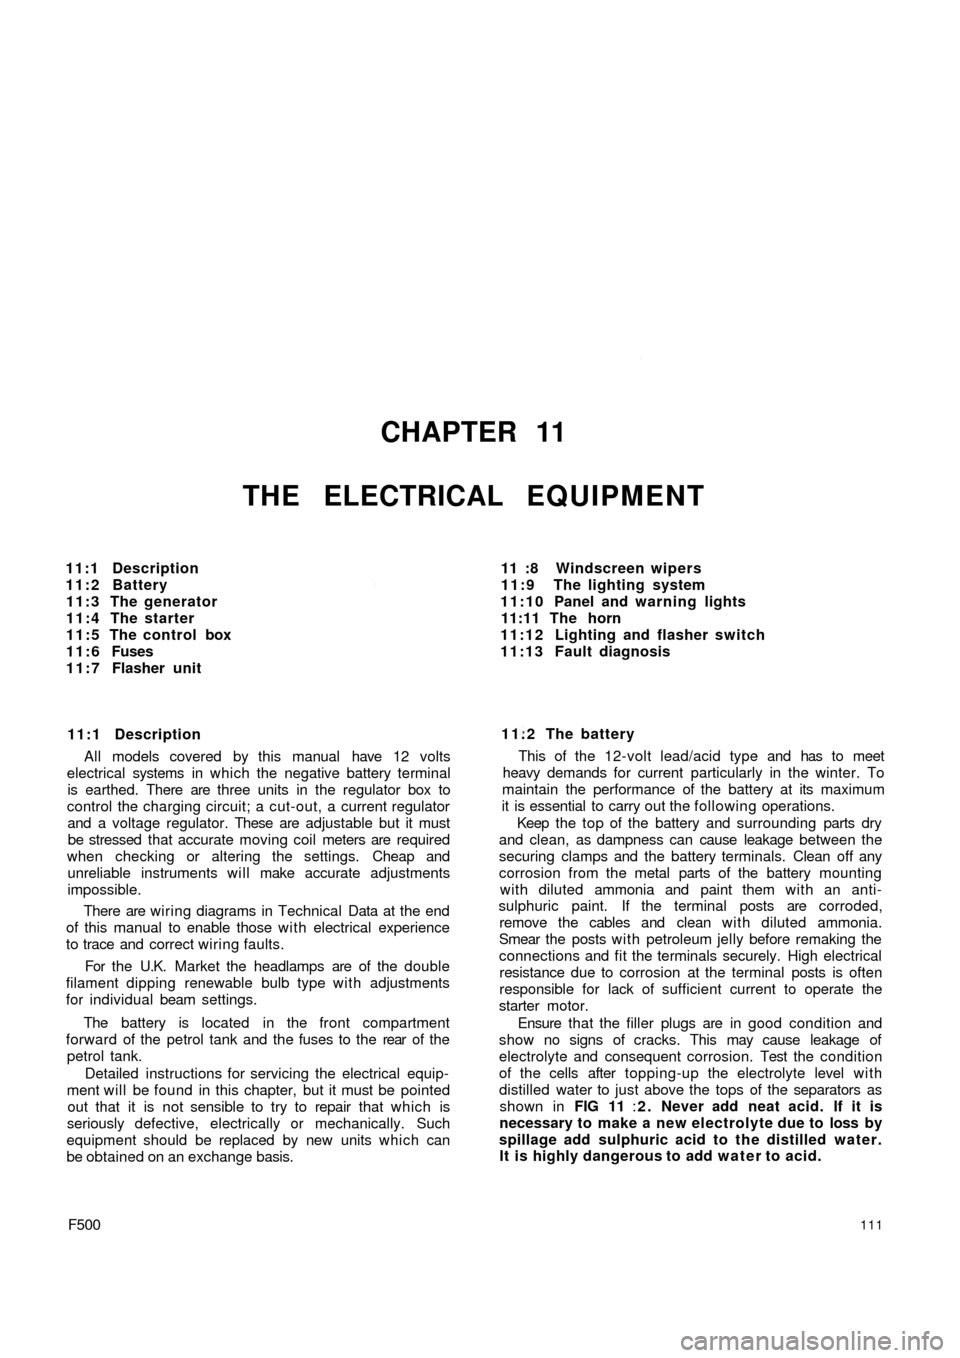 FIAT 500 1972 1.G Workshop Manual CHAPTER 11
THE ELECTRICAL EQUIPMENT
11:1 Description
11:2 Battery
11:3 The generator
11:4 The starter
11:5 The control box
1 1 : 6 Fuses
1 1 : 7 Flasher unit
11:1 Description
All models covered by thi